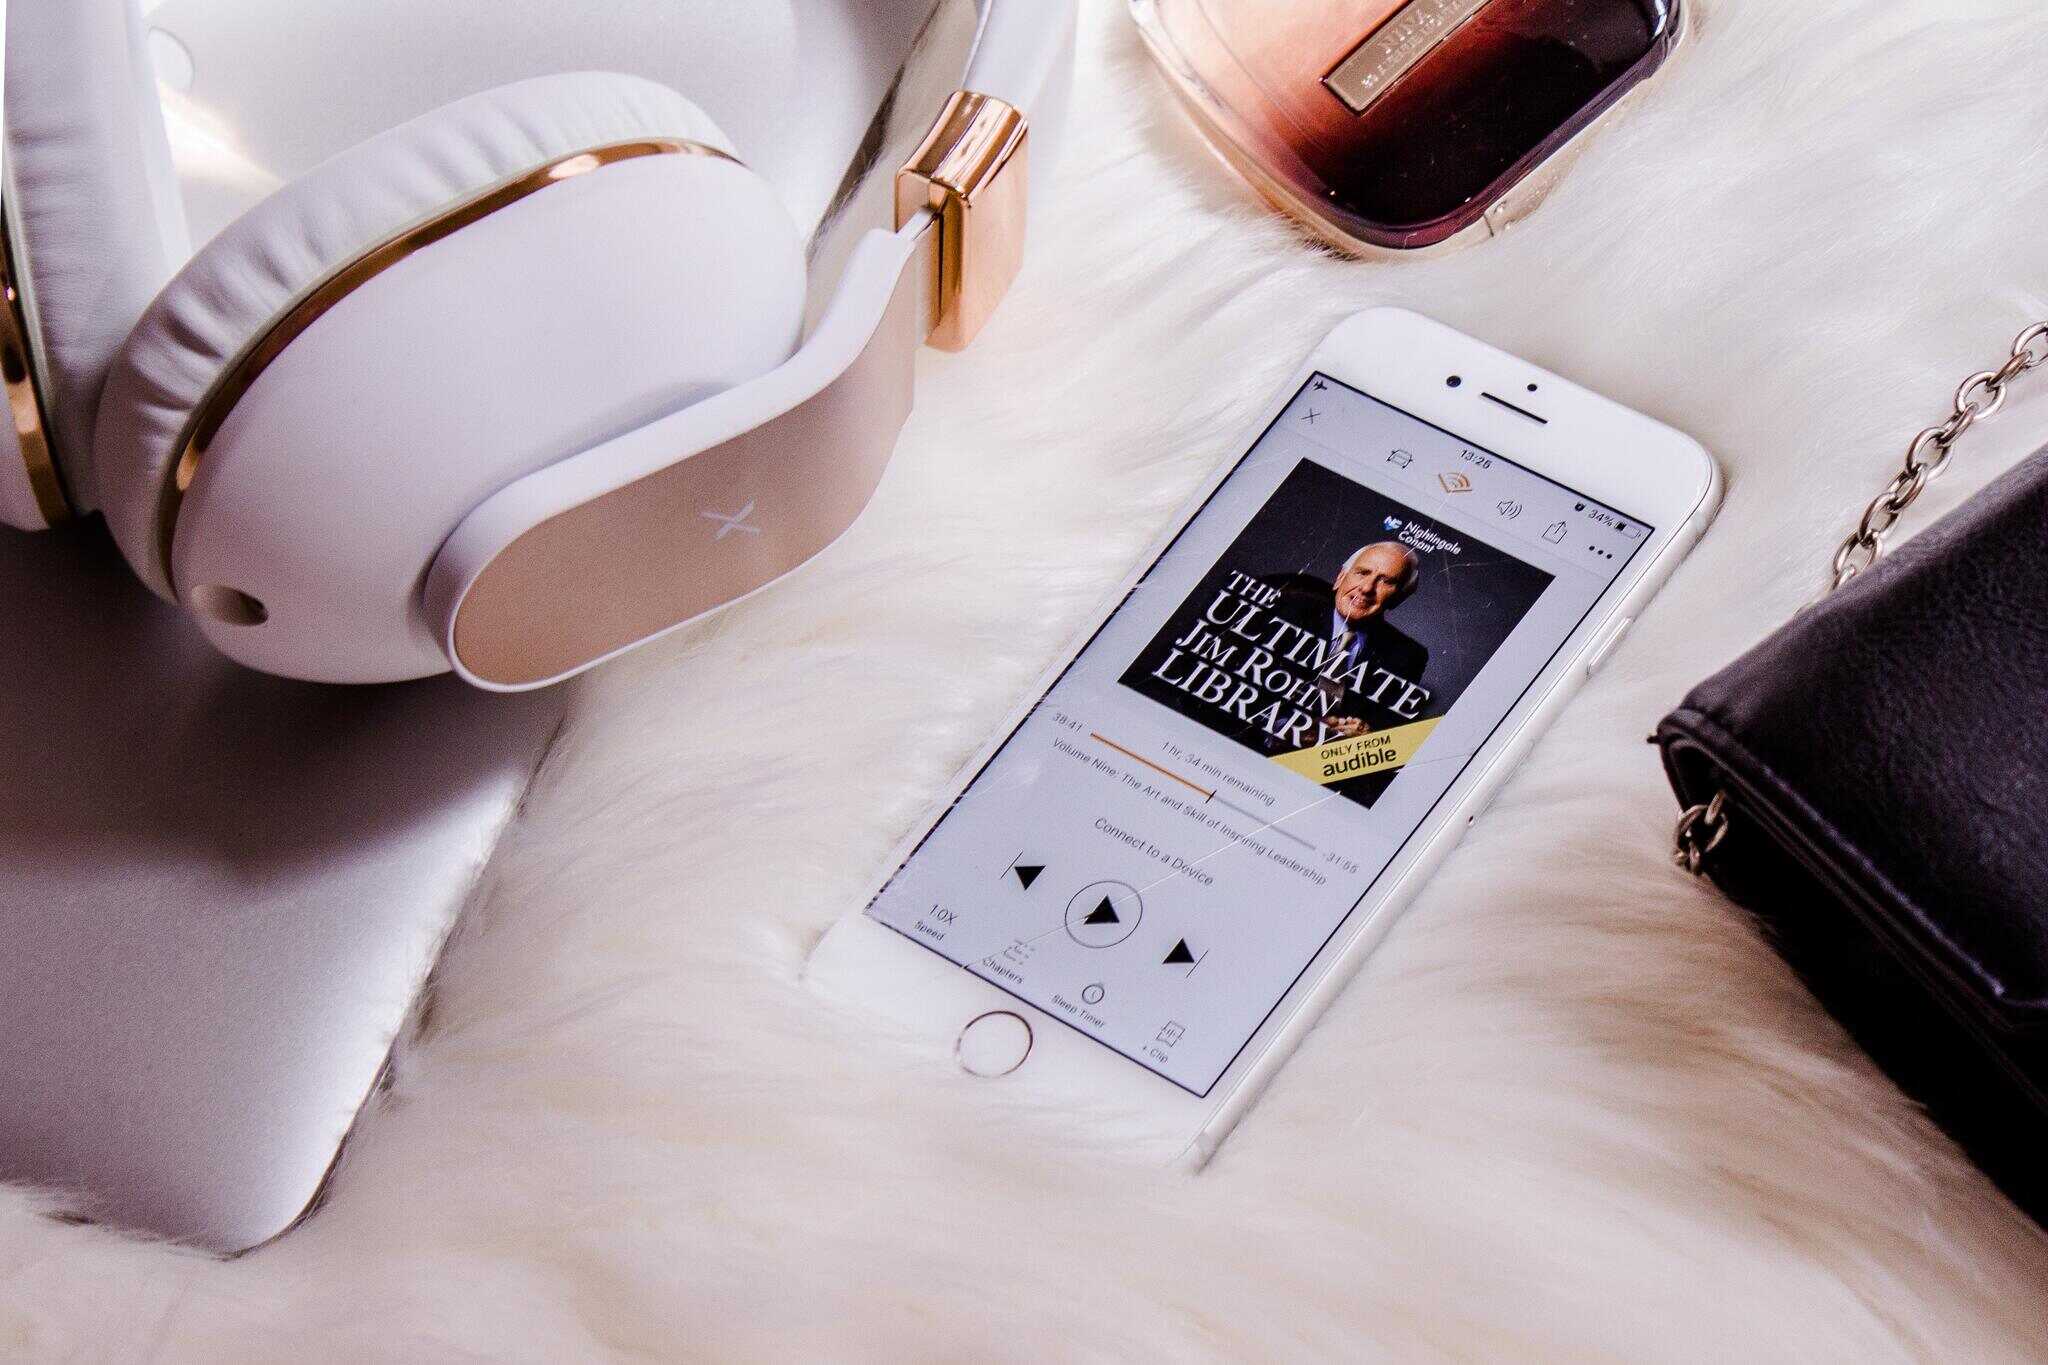 An iPhone displaying an audiobook with headphones next to it